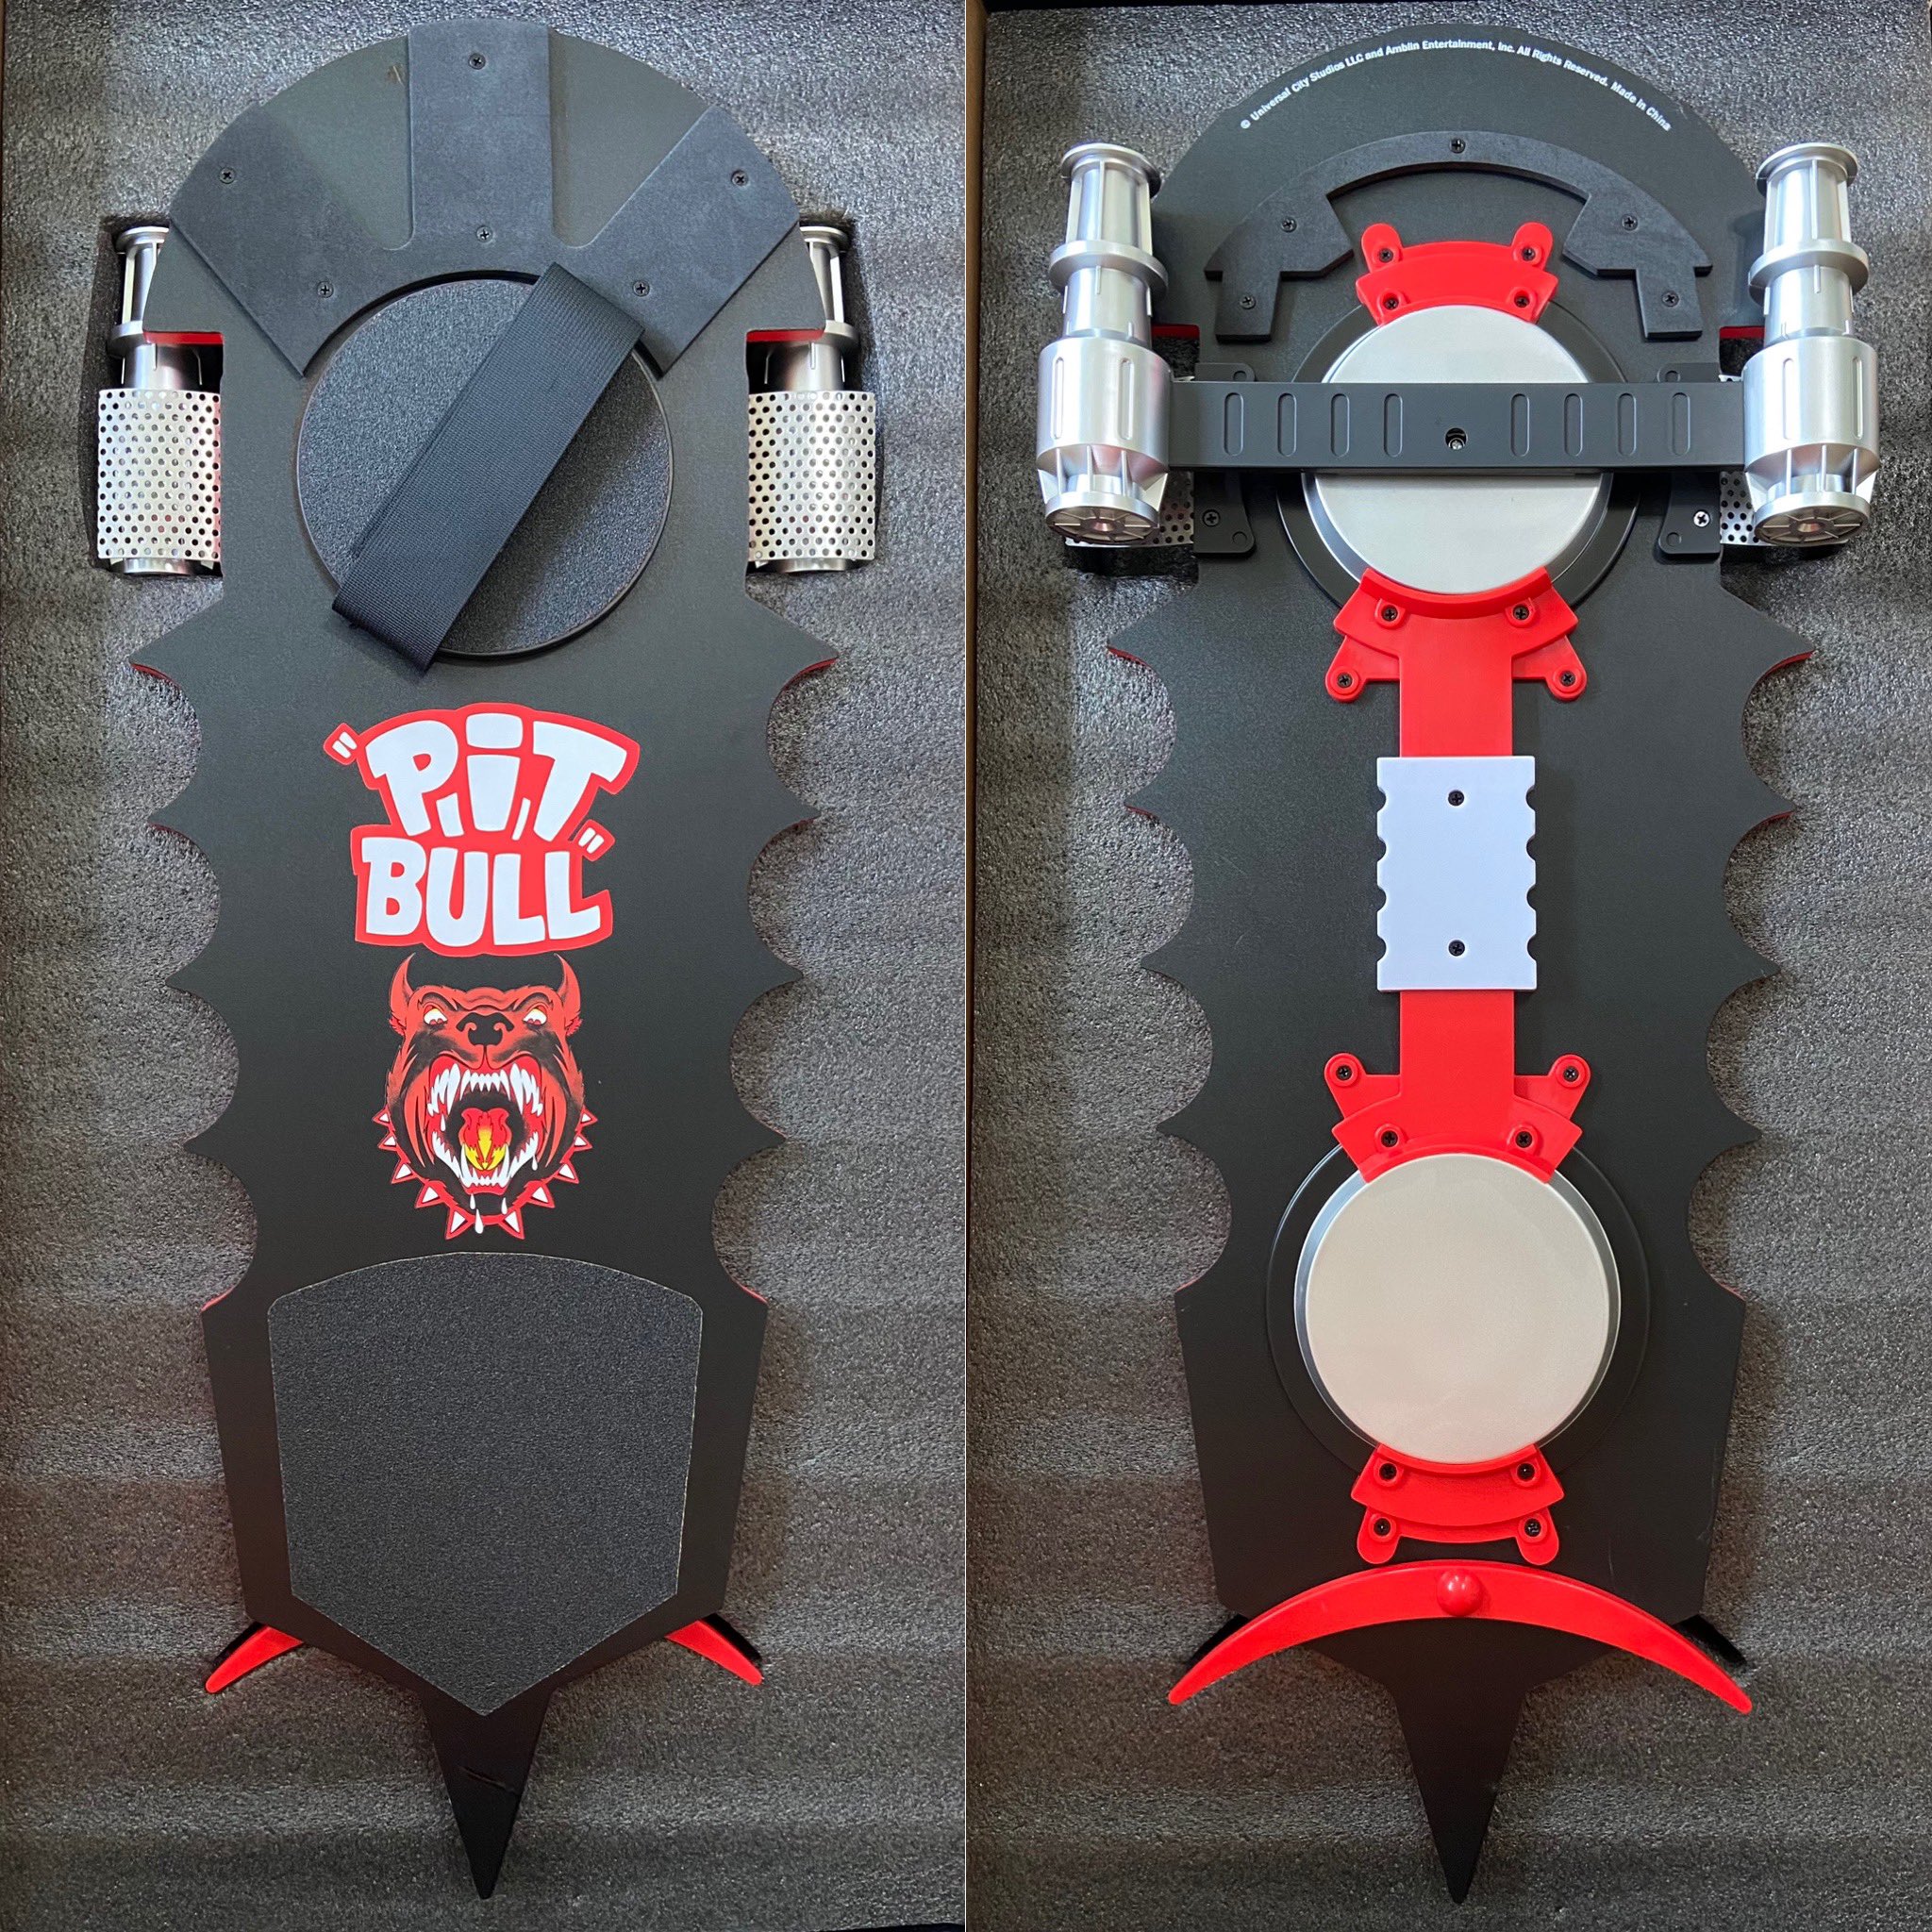 Collect BTTF on X: Thanks to @funcostumes, an officially licensed replica  of Griff's Pit Bull hoverboard has arrived! The incredible details make it  a great choice for a display piece or prop.